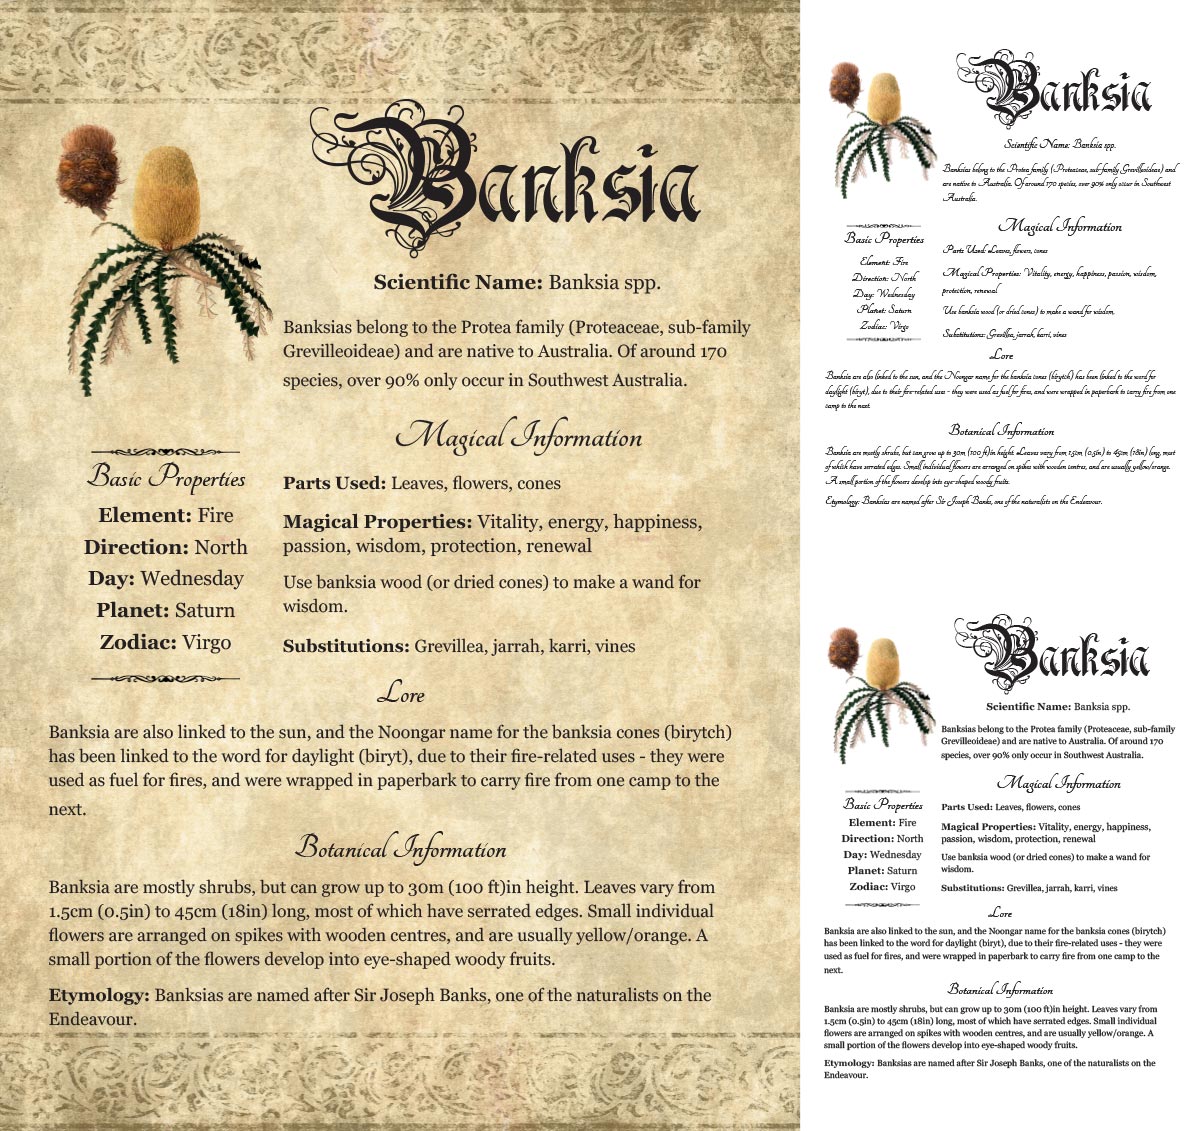 Collage of 3 versions of the Banksia grimoire page: with a readable/serif vs script font + with/without background